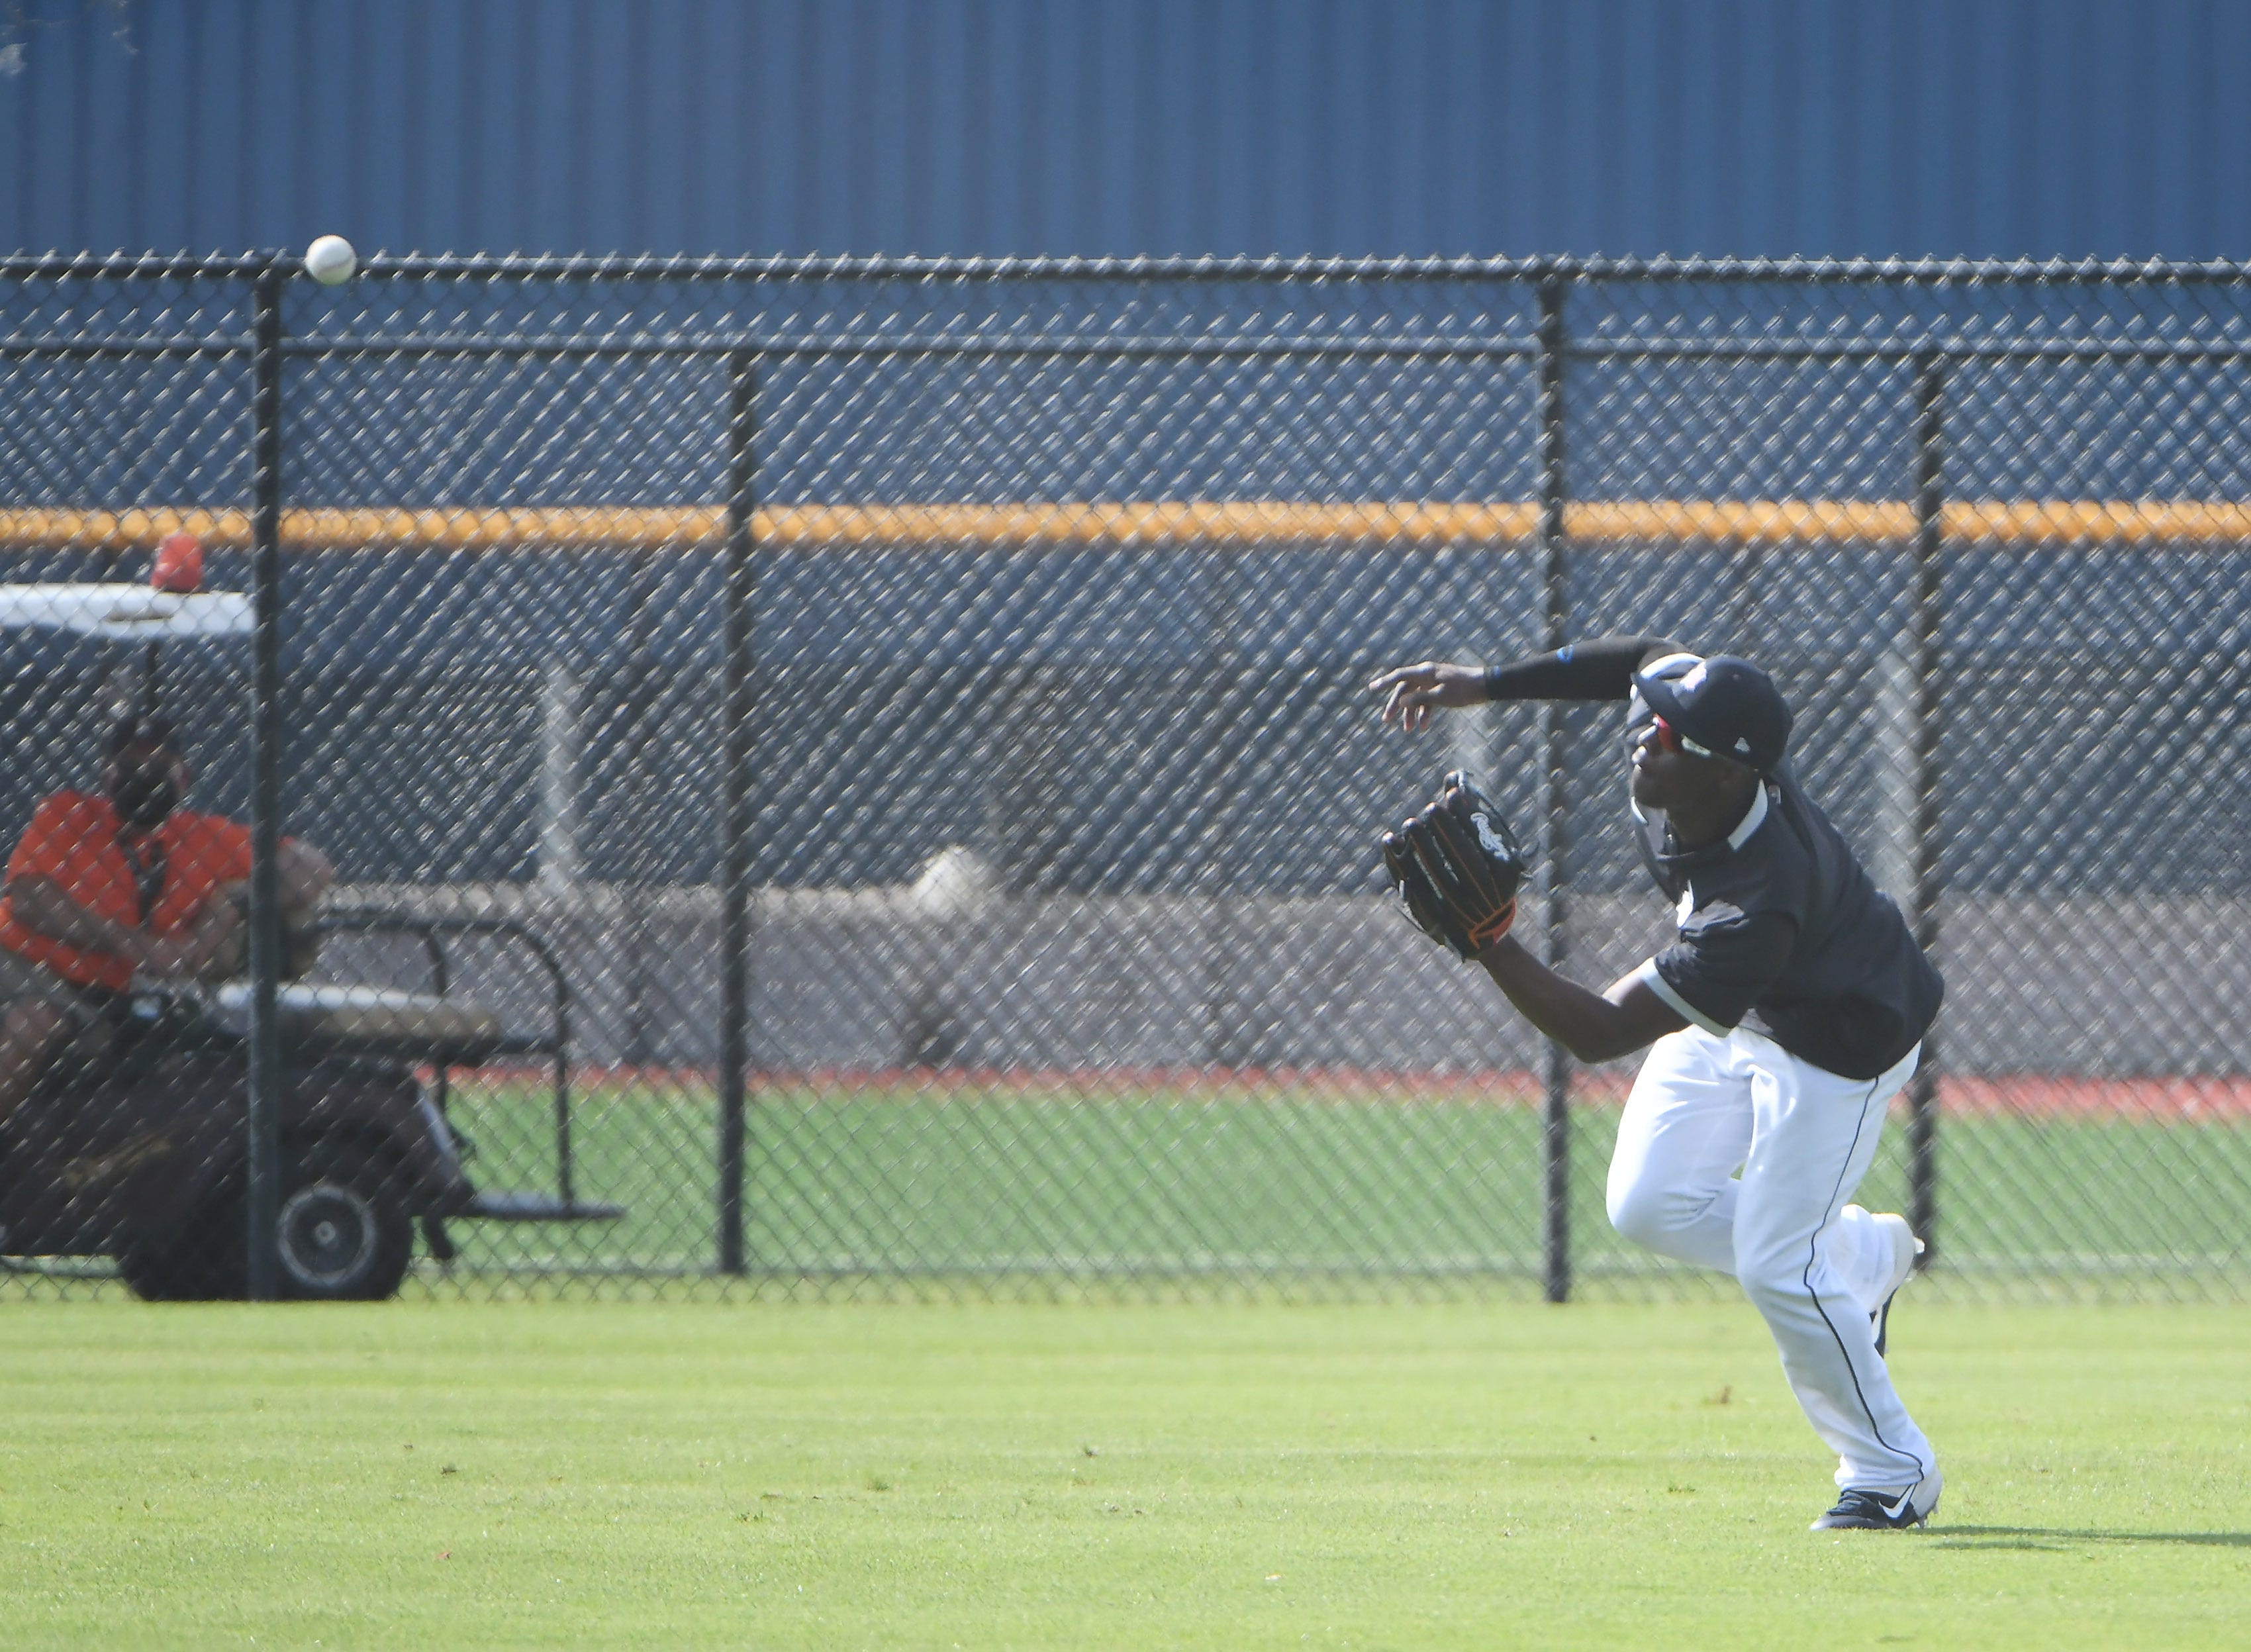 Tigers outfielder Daz Cameron makes a running catch.